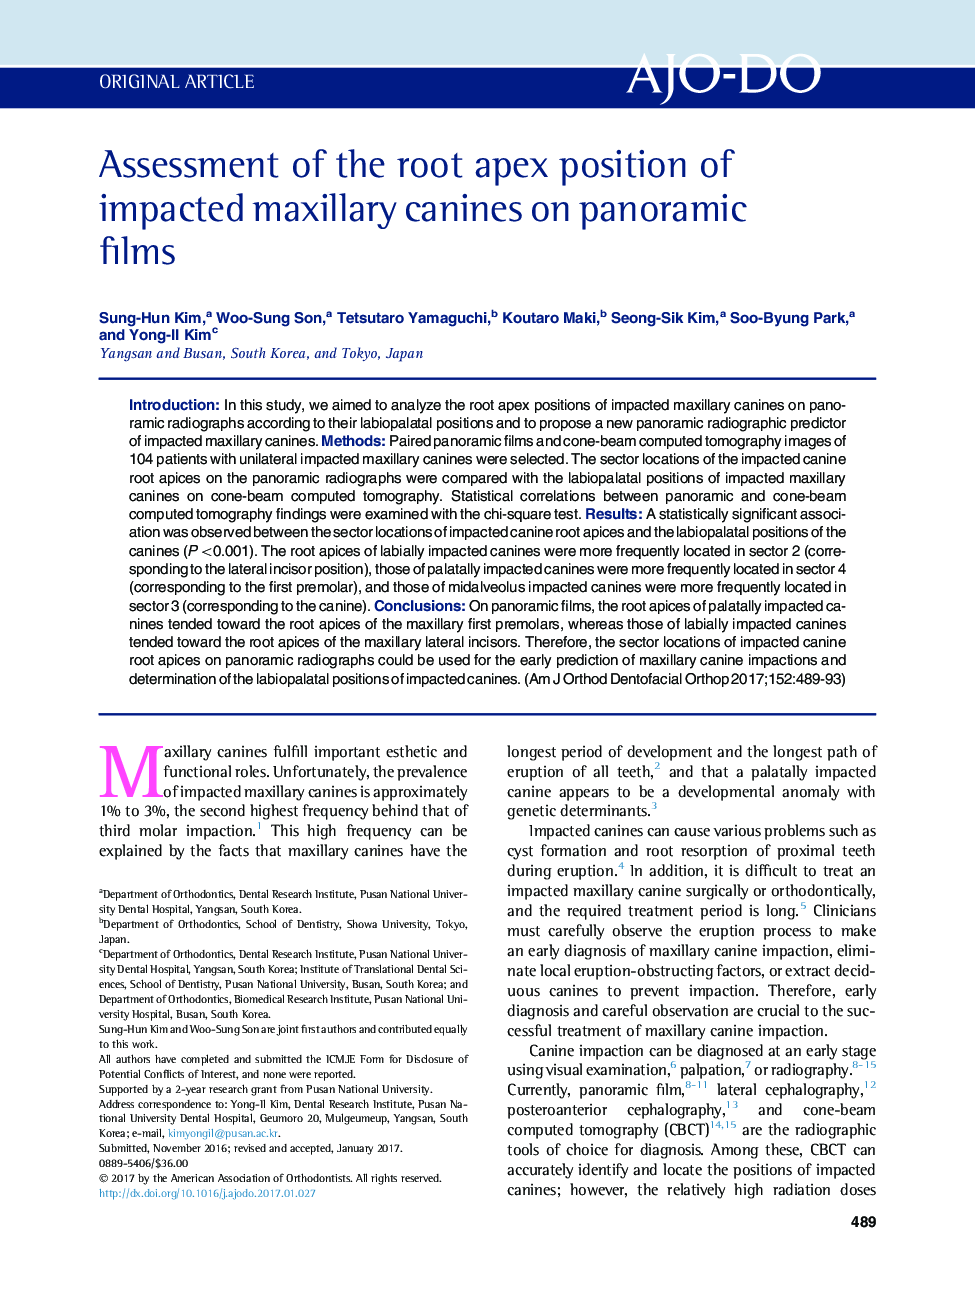 Assessment of the root apex position of impacted maxillary canines on panoramic films